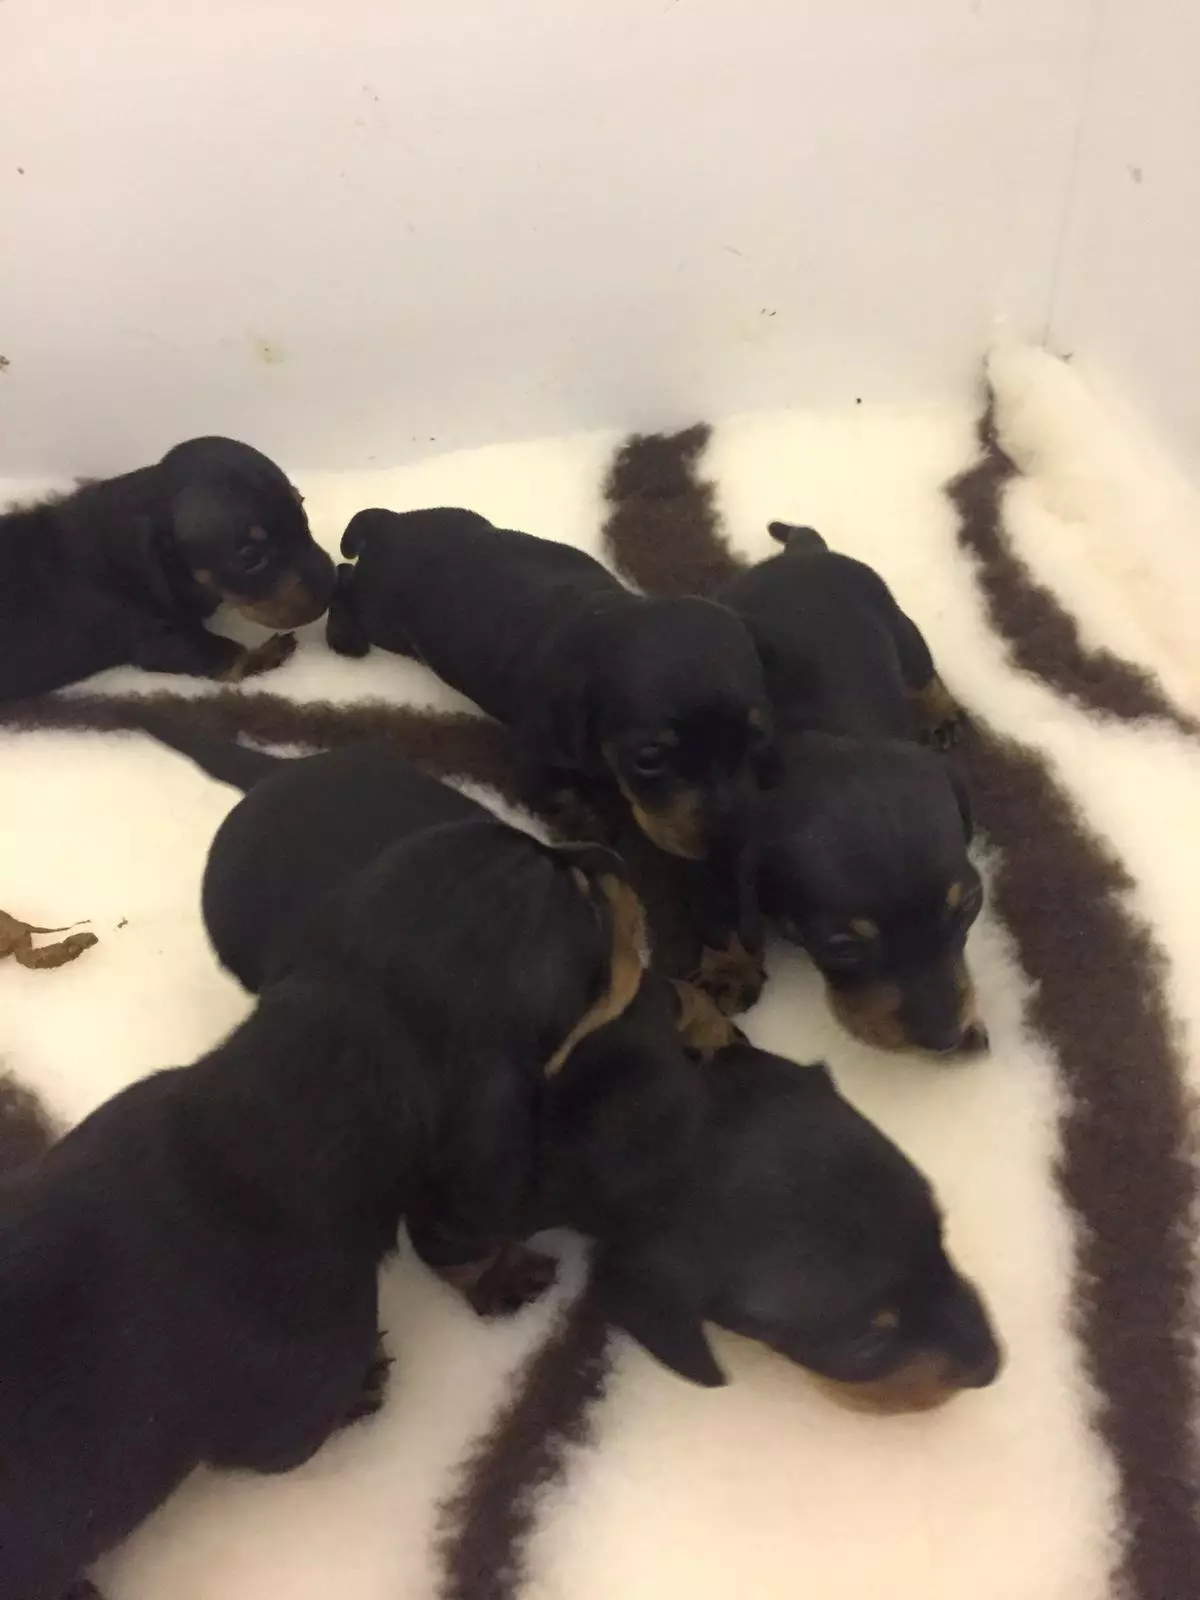 The dog was recovering from a C-section when thieves took her and her pups (